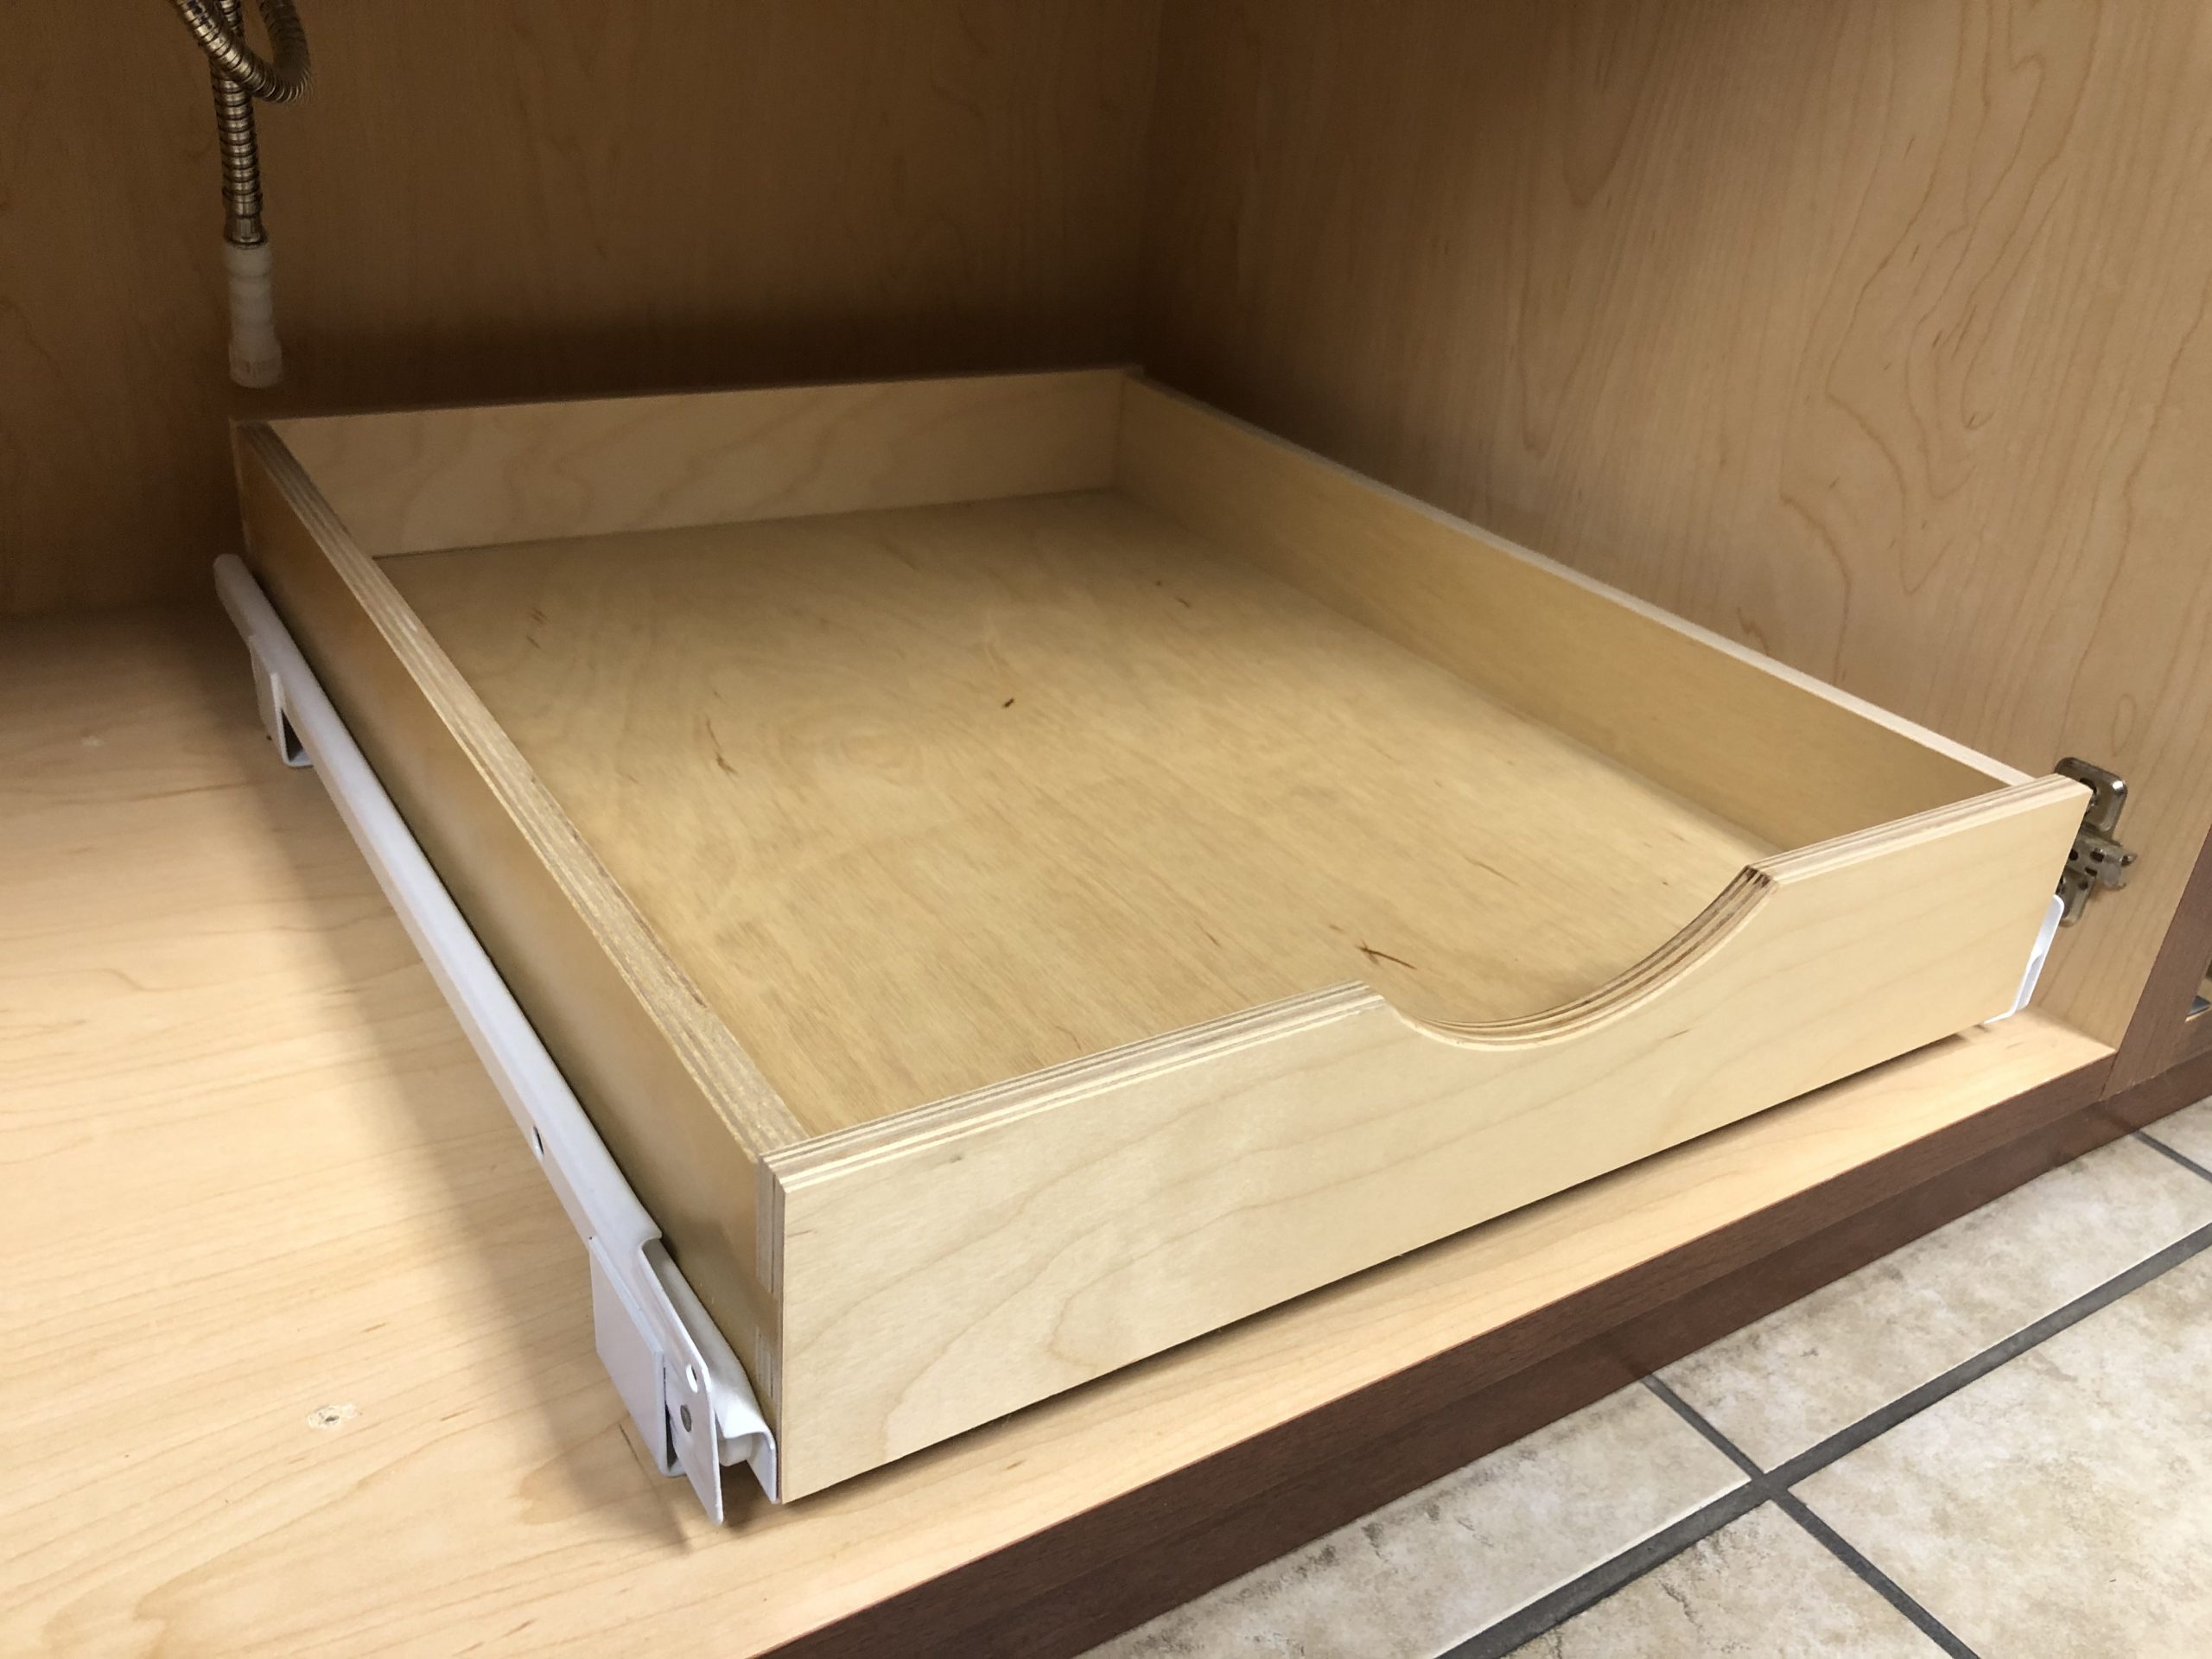 Install PullOut Drawer System Using Houck 950 Bottom Mounted Slides